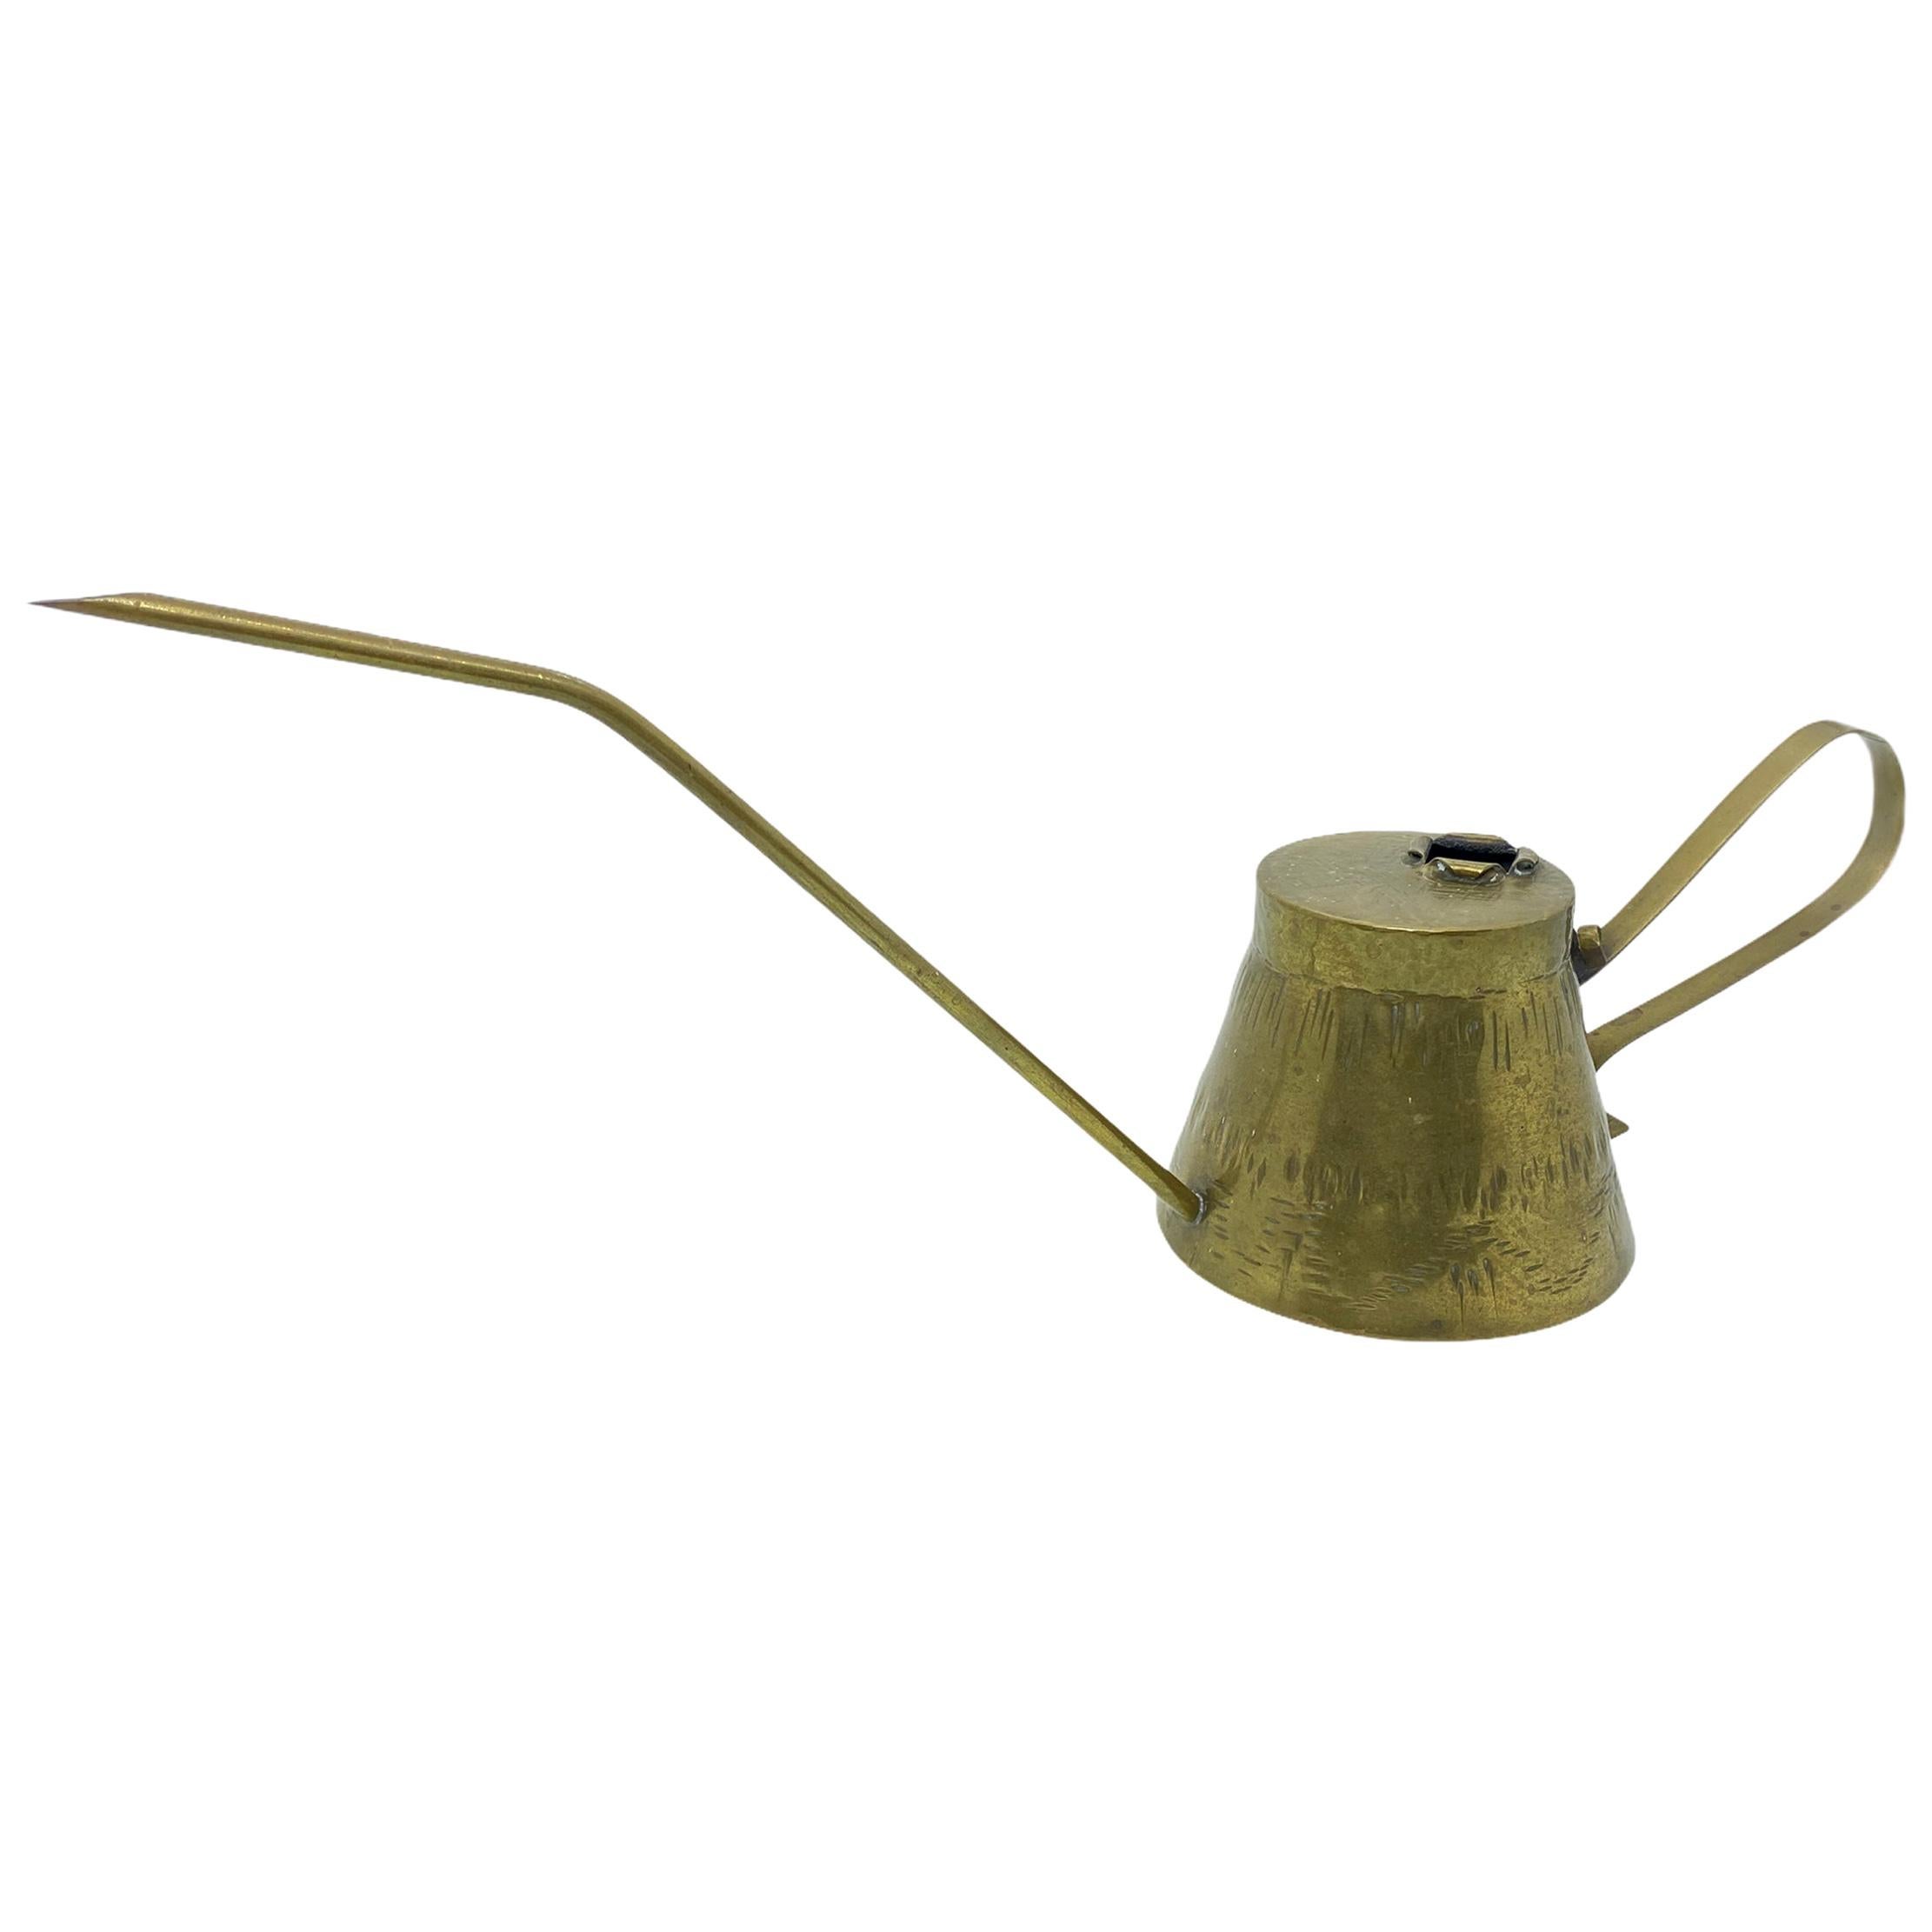 Vintage Mid-Century Modern Brass Bonsai Watering Can with Long Spout, 1960s For Sale